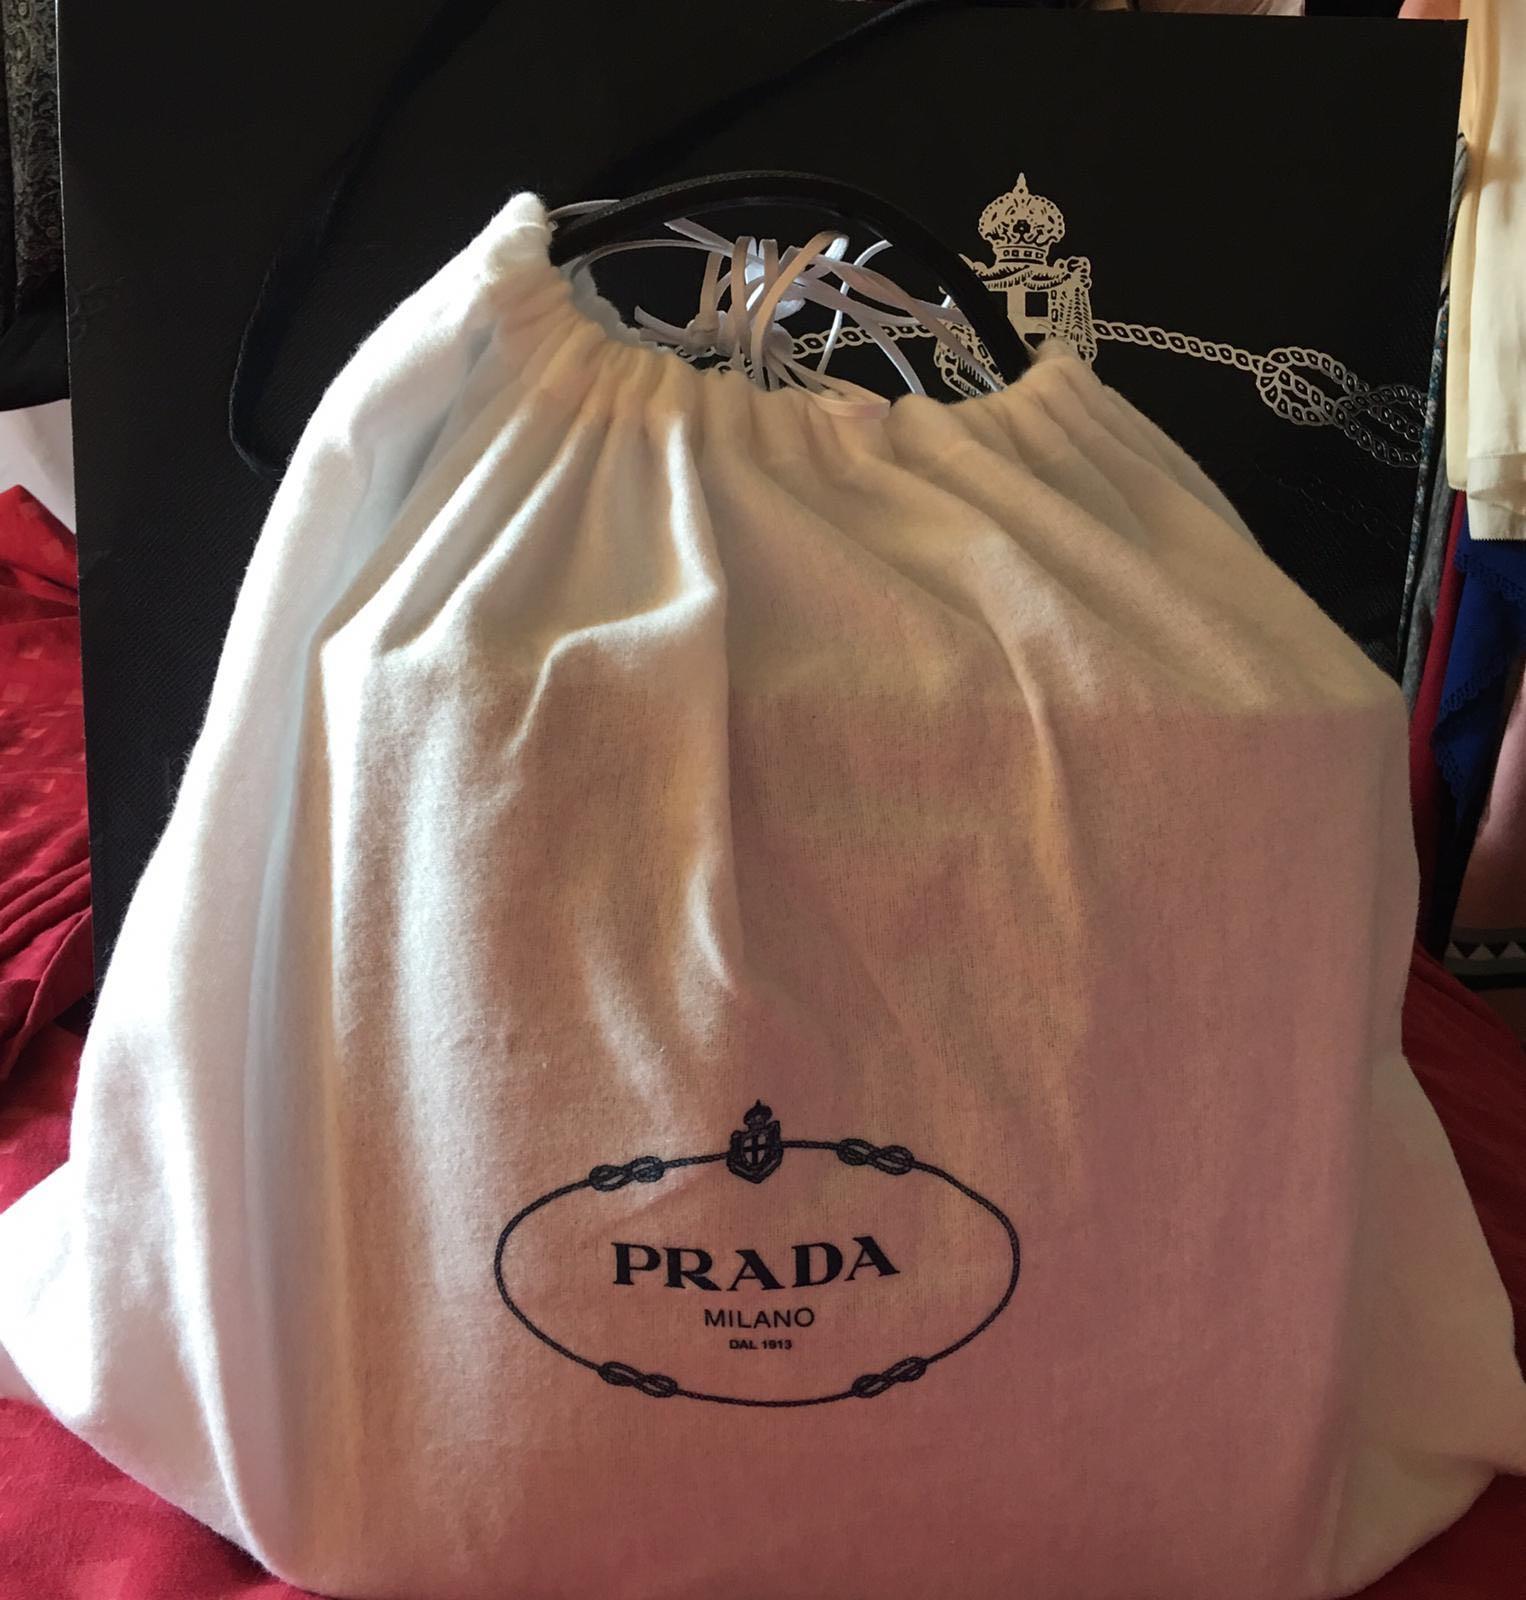 Prada Panier Bucket Bag Review & What Fits Inside, Making Apple Pie &  Dacquoise, Daily Life in Korea